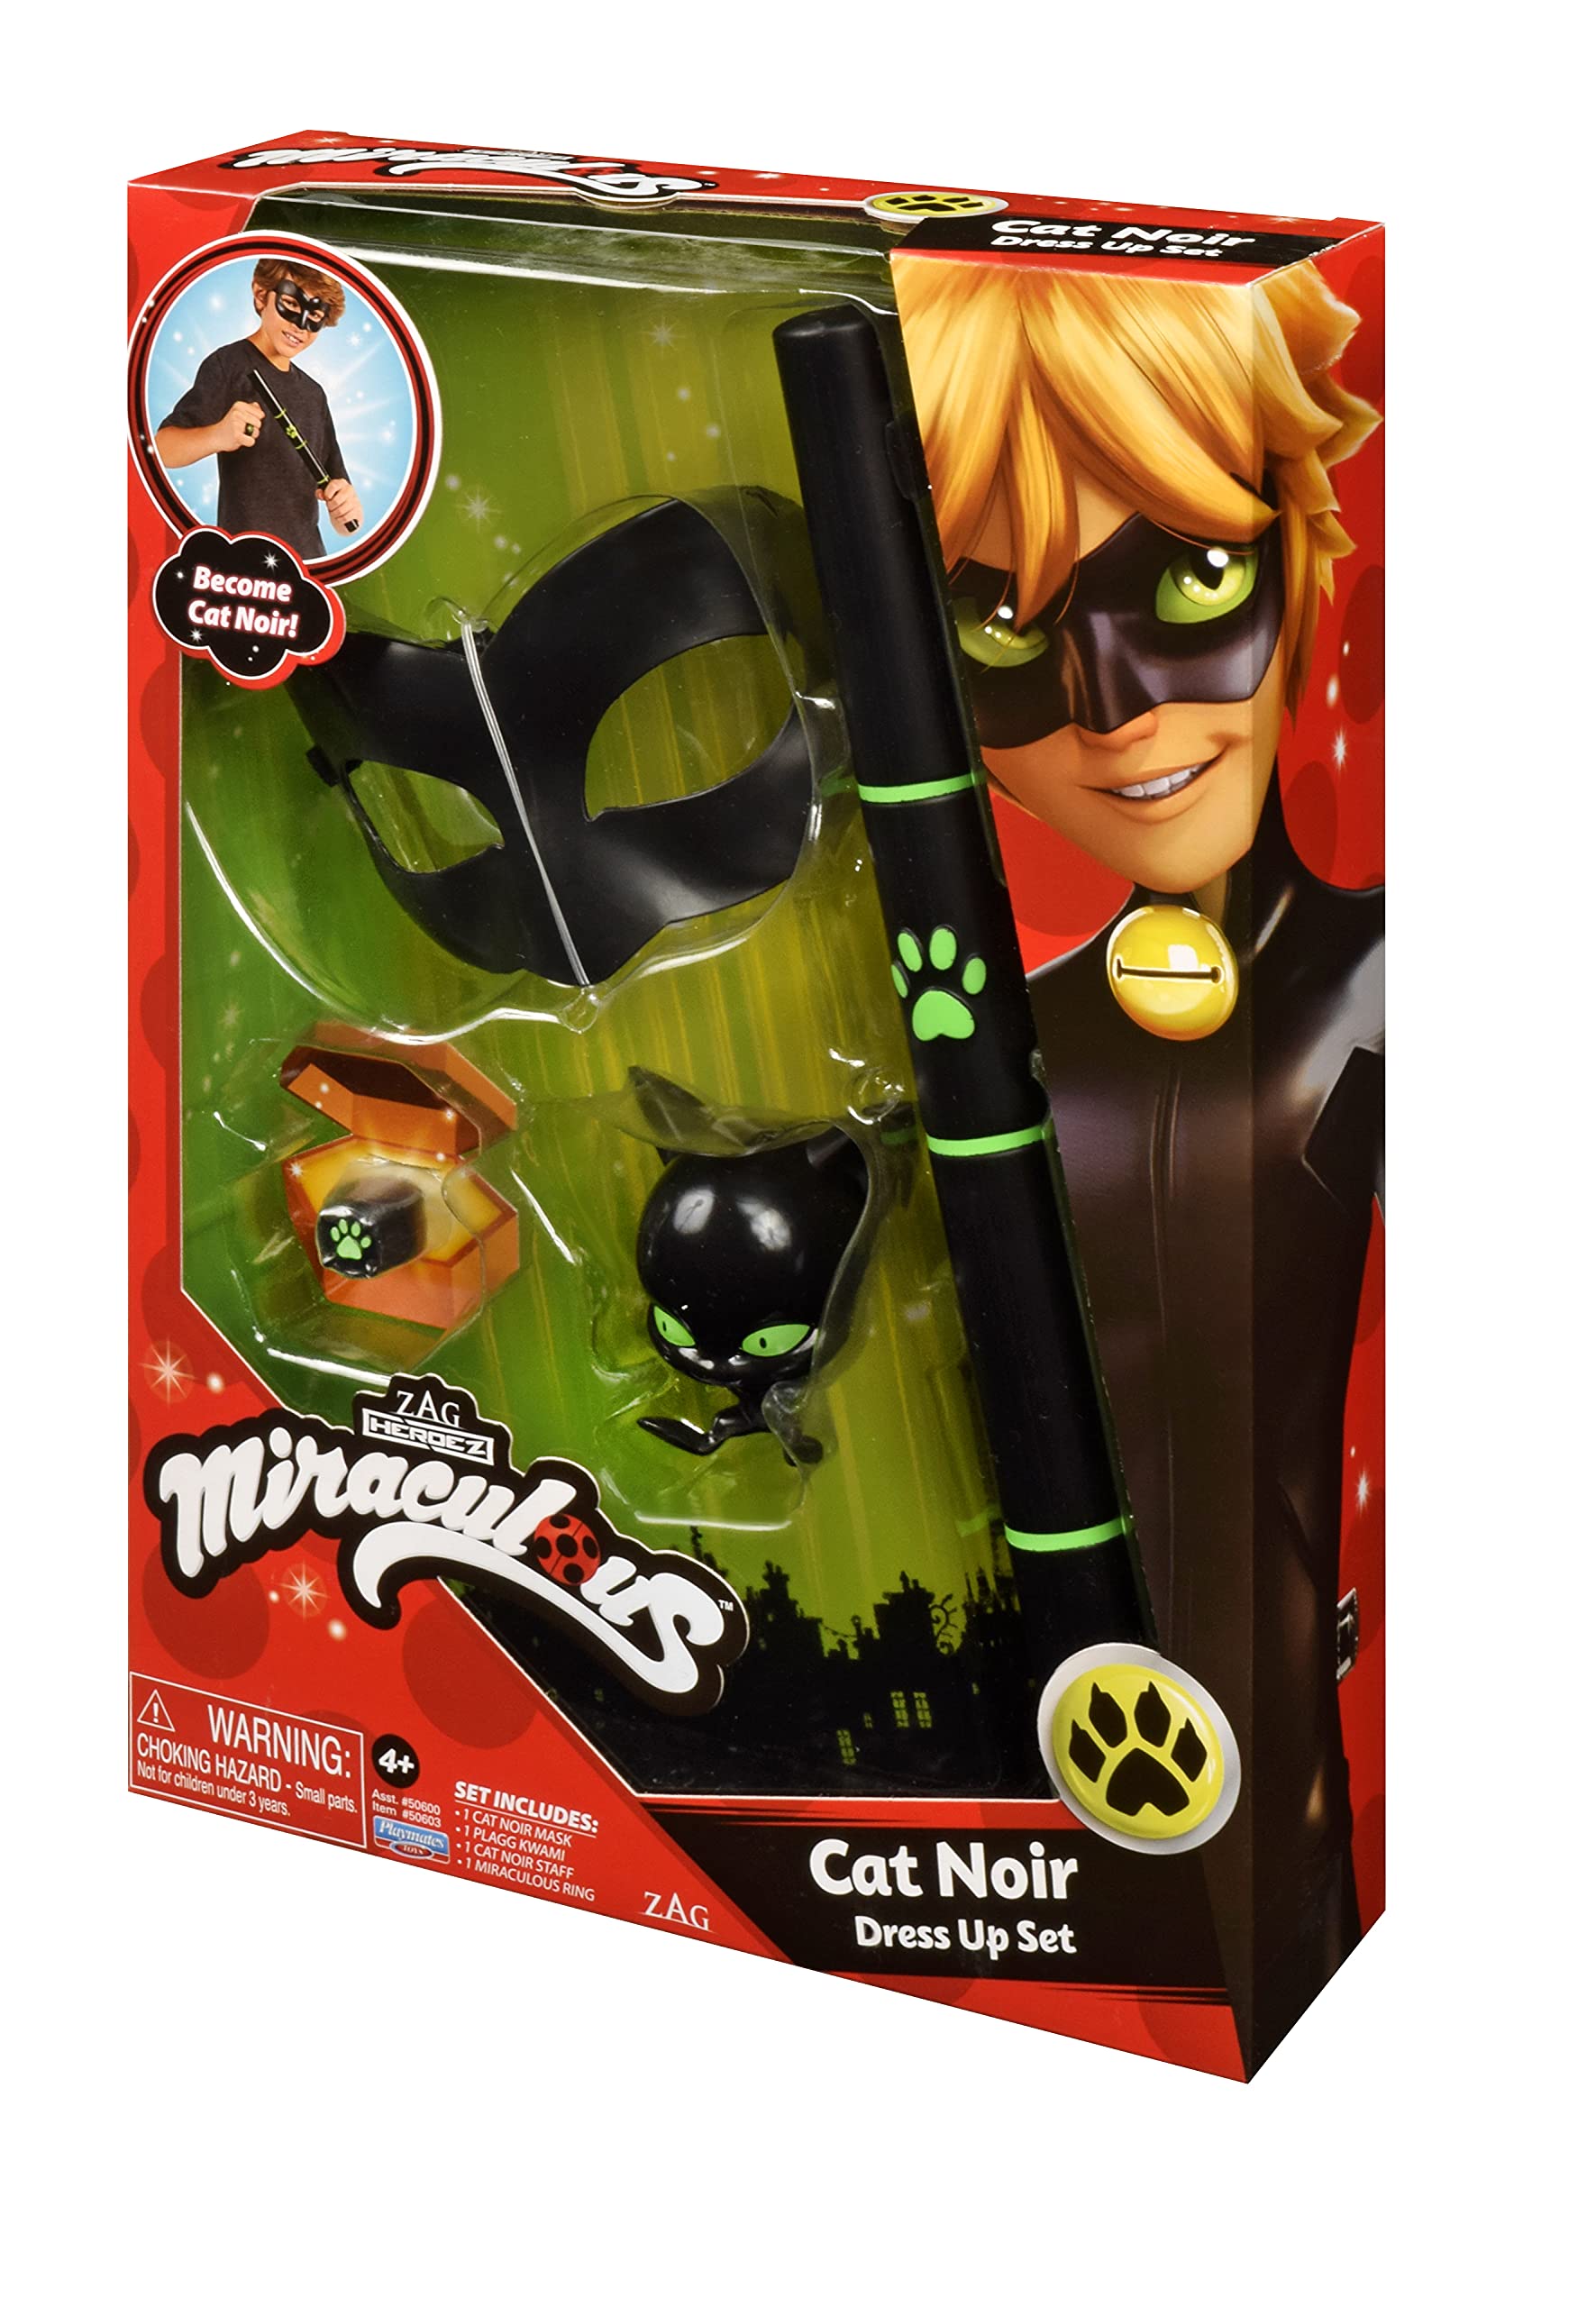 Miraculous: Tales Of Ladybug And Cat Noir Cat Noir Role Play Set Cat Noir Costume Kids Fancy Dress Set Mask And Accessories Ladybug Superhero Costumes For Girls And Boys